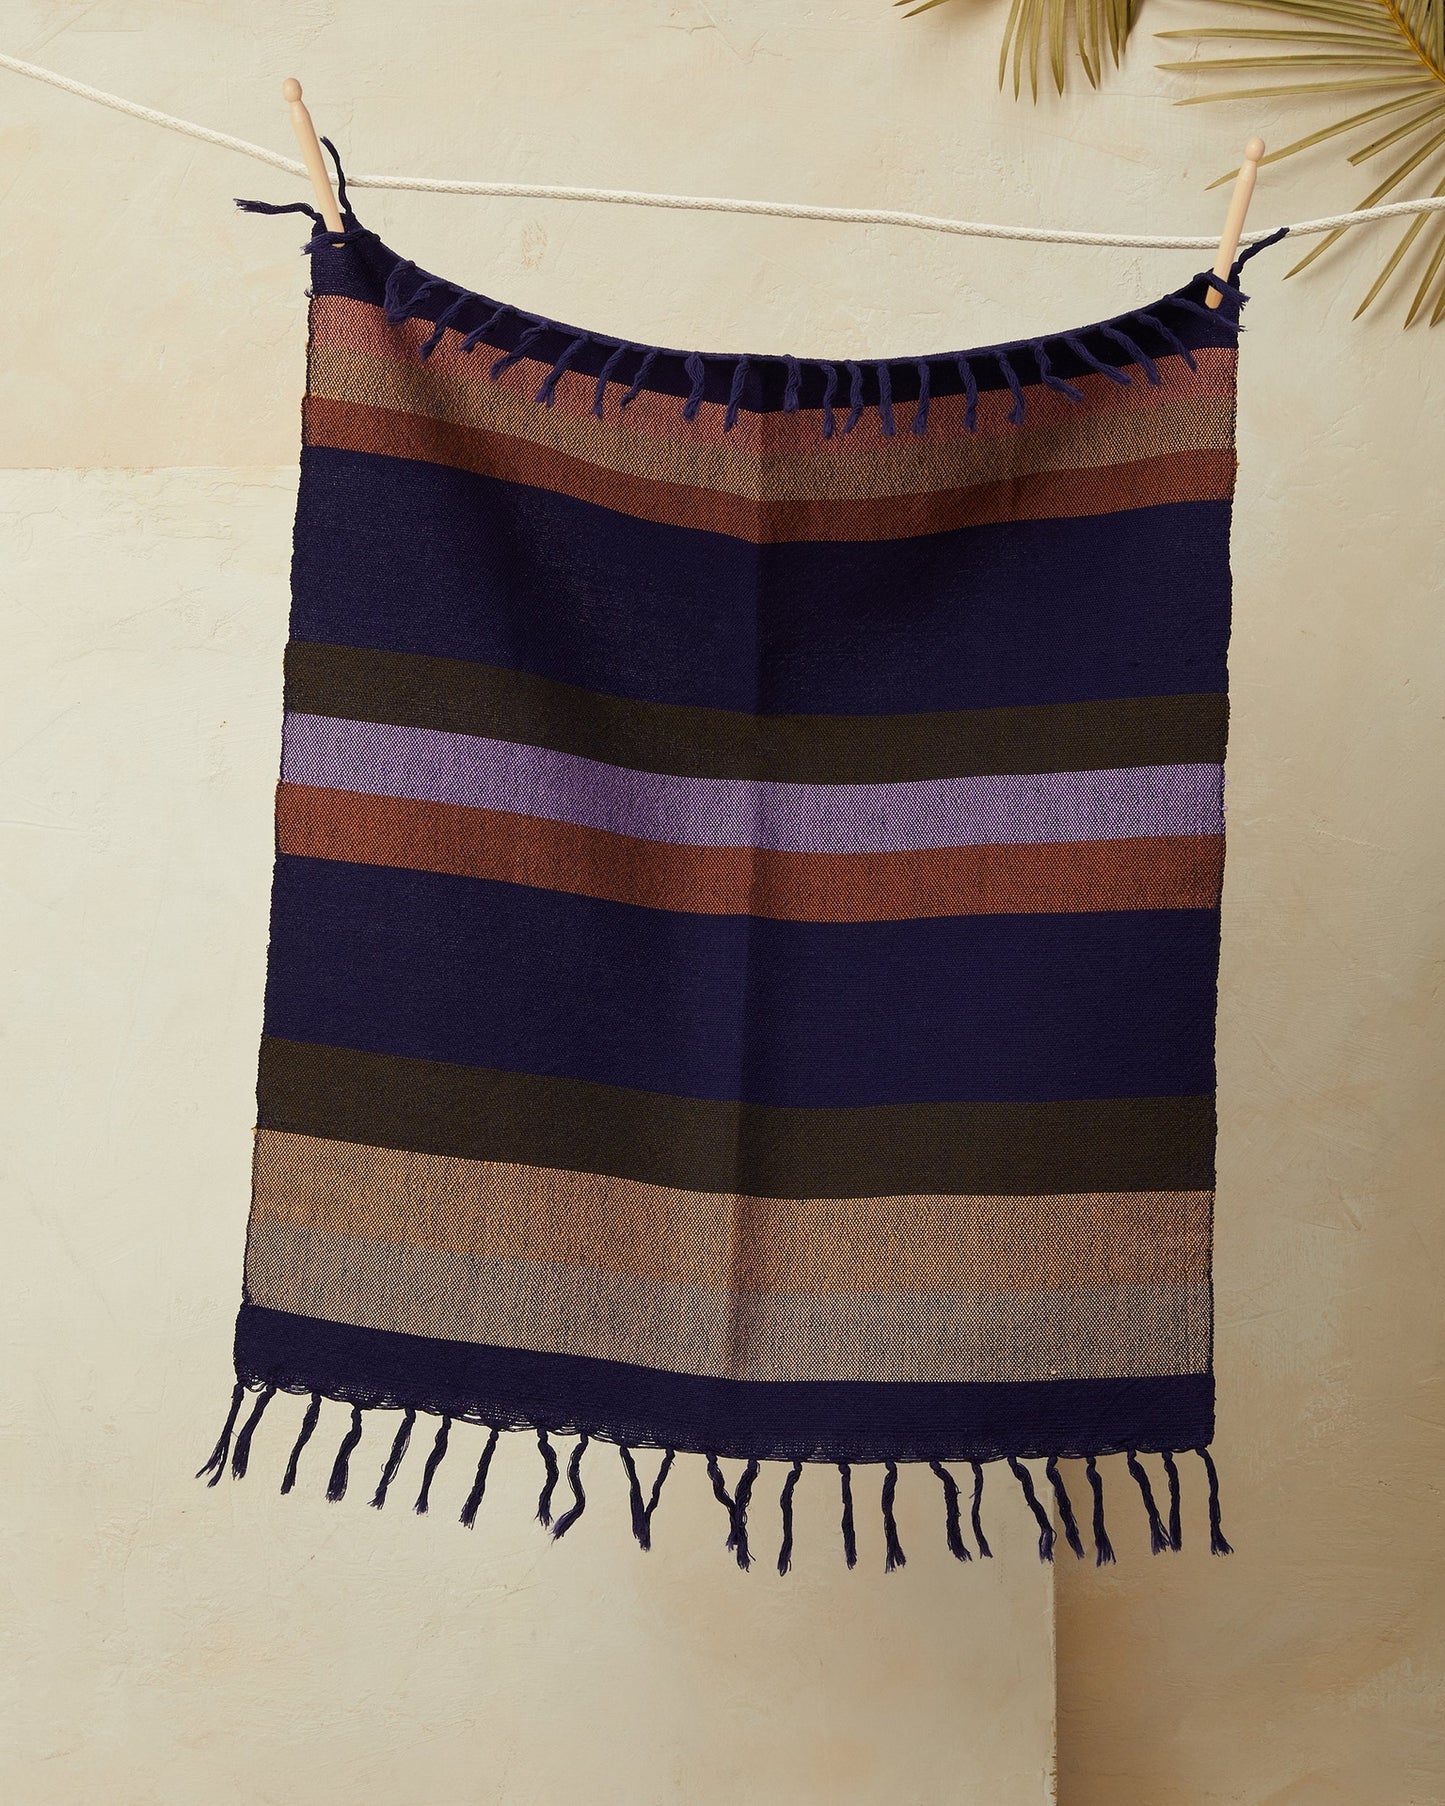 This tea towel is a classic yet modern addition to any kitchen or bathroom. Soft enough to function as hand towels, and durable enough to soak up spills around the kitchen. You can also use them as a centerpiece of a coffee or dining table. Finished with a rustic edge and fringe. Handwoven in Oaxaca, Mexico.